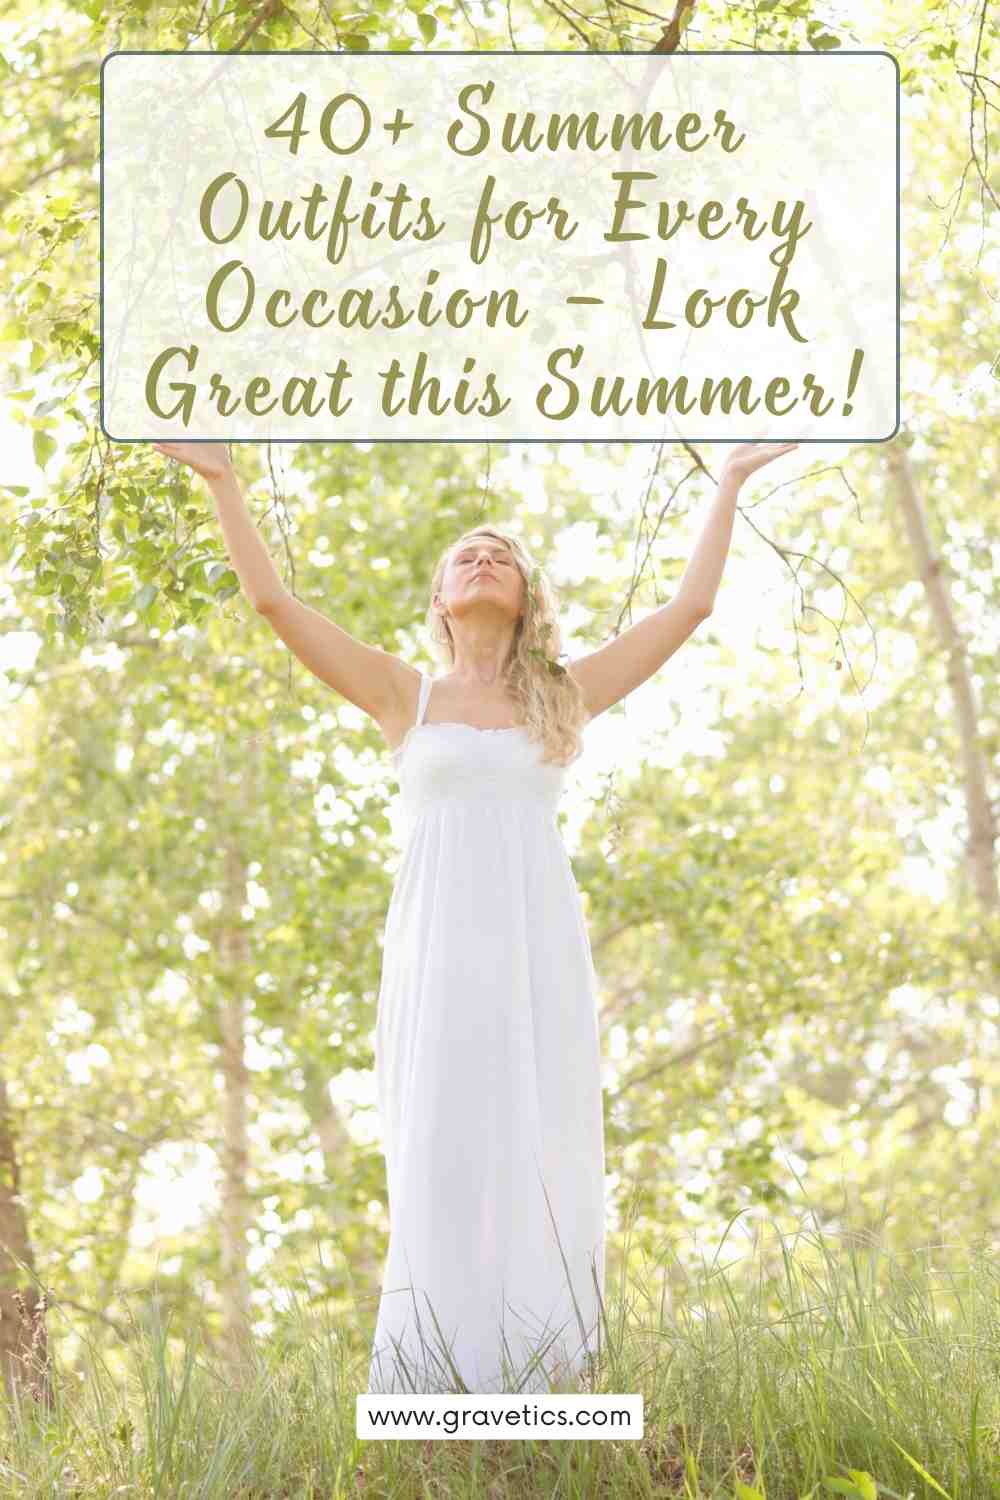 Lovely Summer Outfits for Every Occasion – Look Great this Summer!